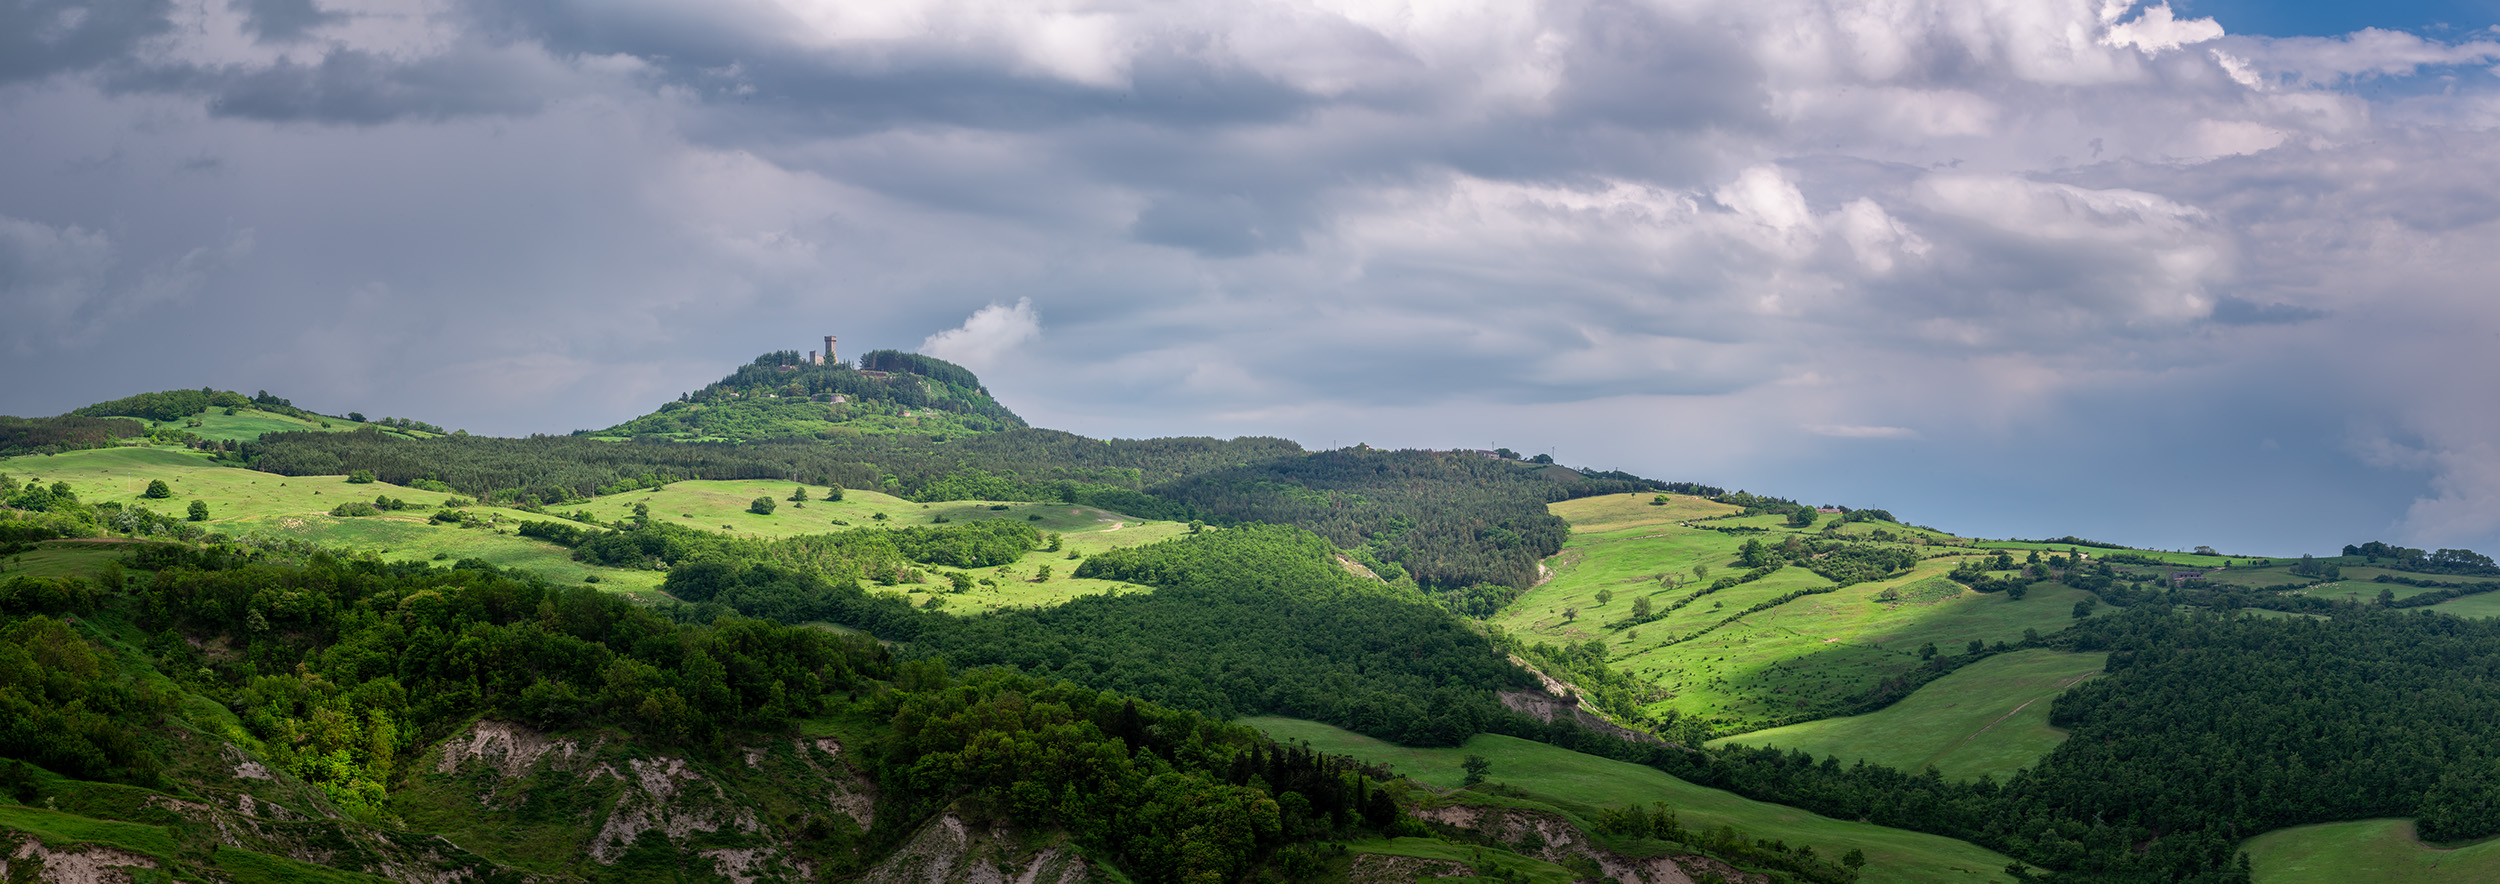 Driving through the picturesque Tuscany countryside I was amazed at the surrounding countryside.  This panoramic image stitches...